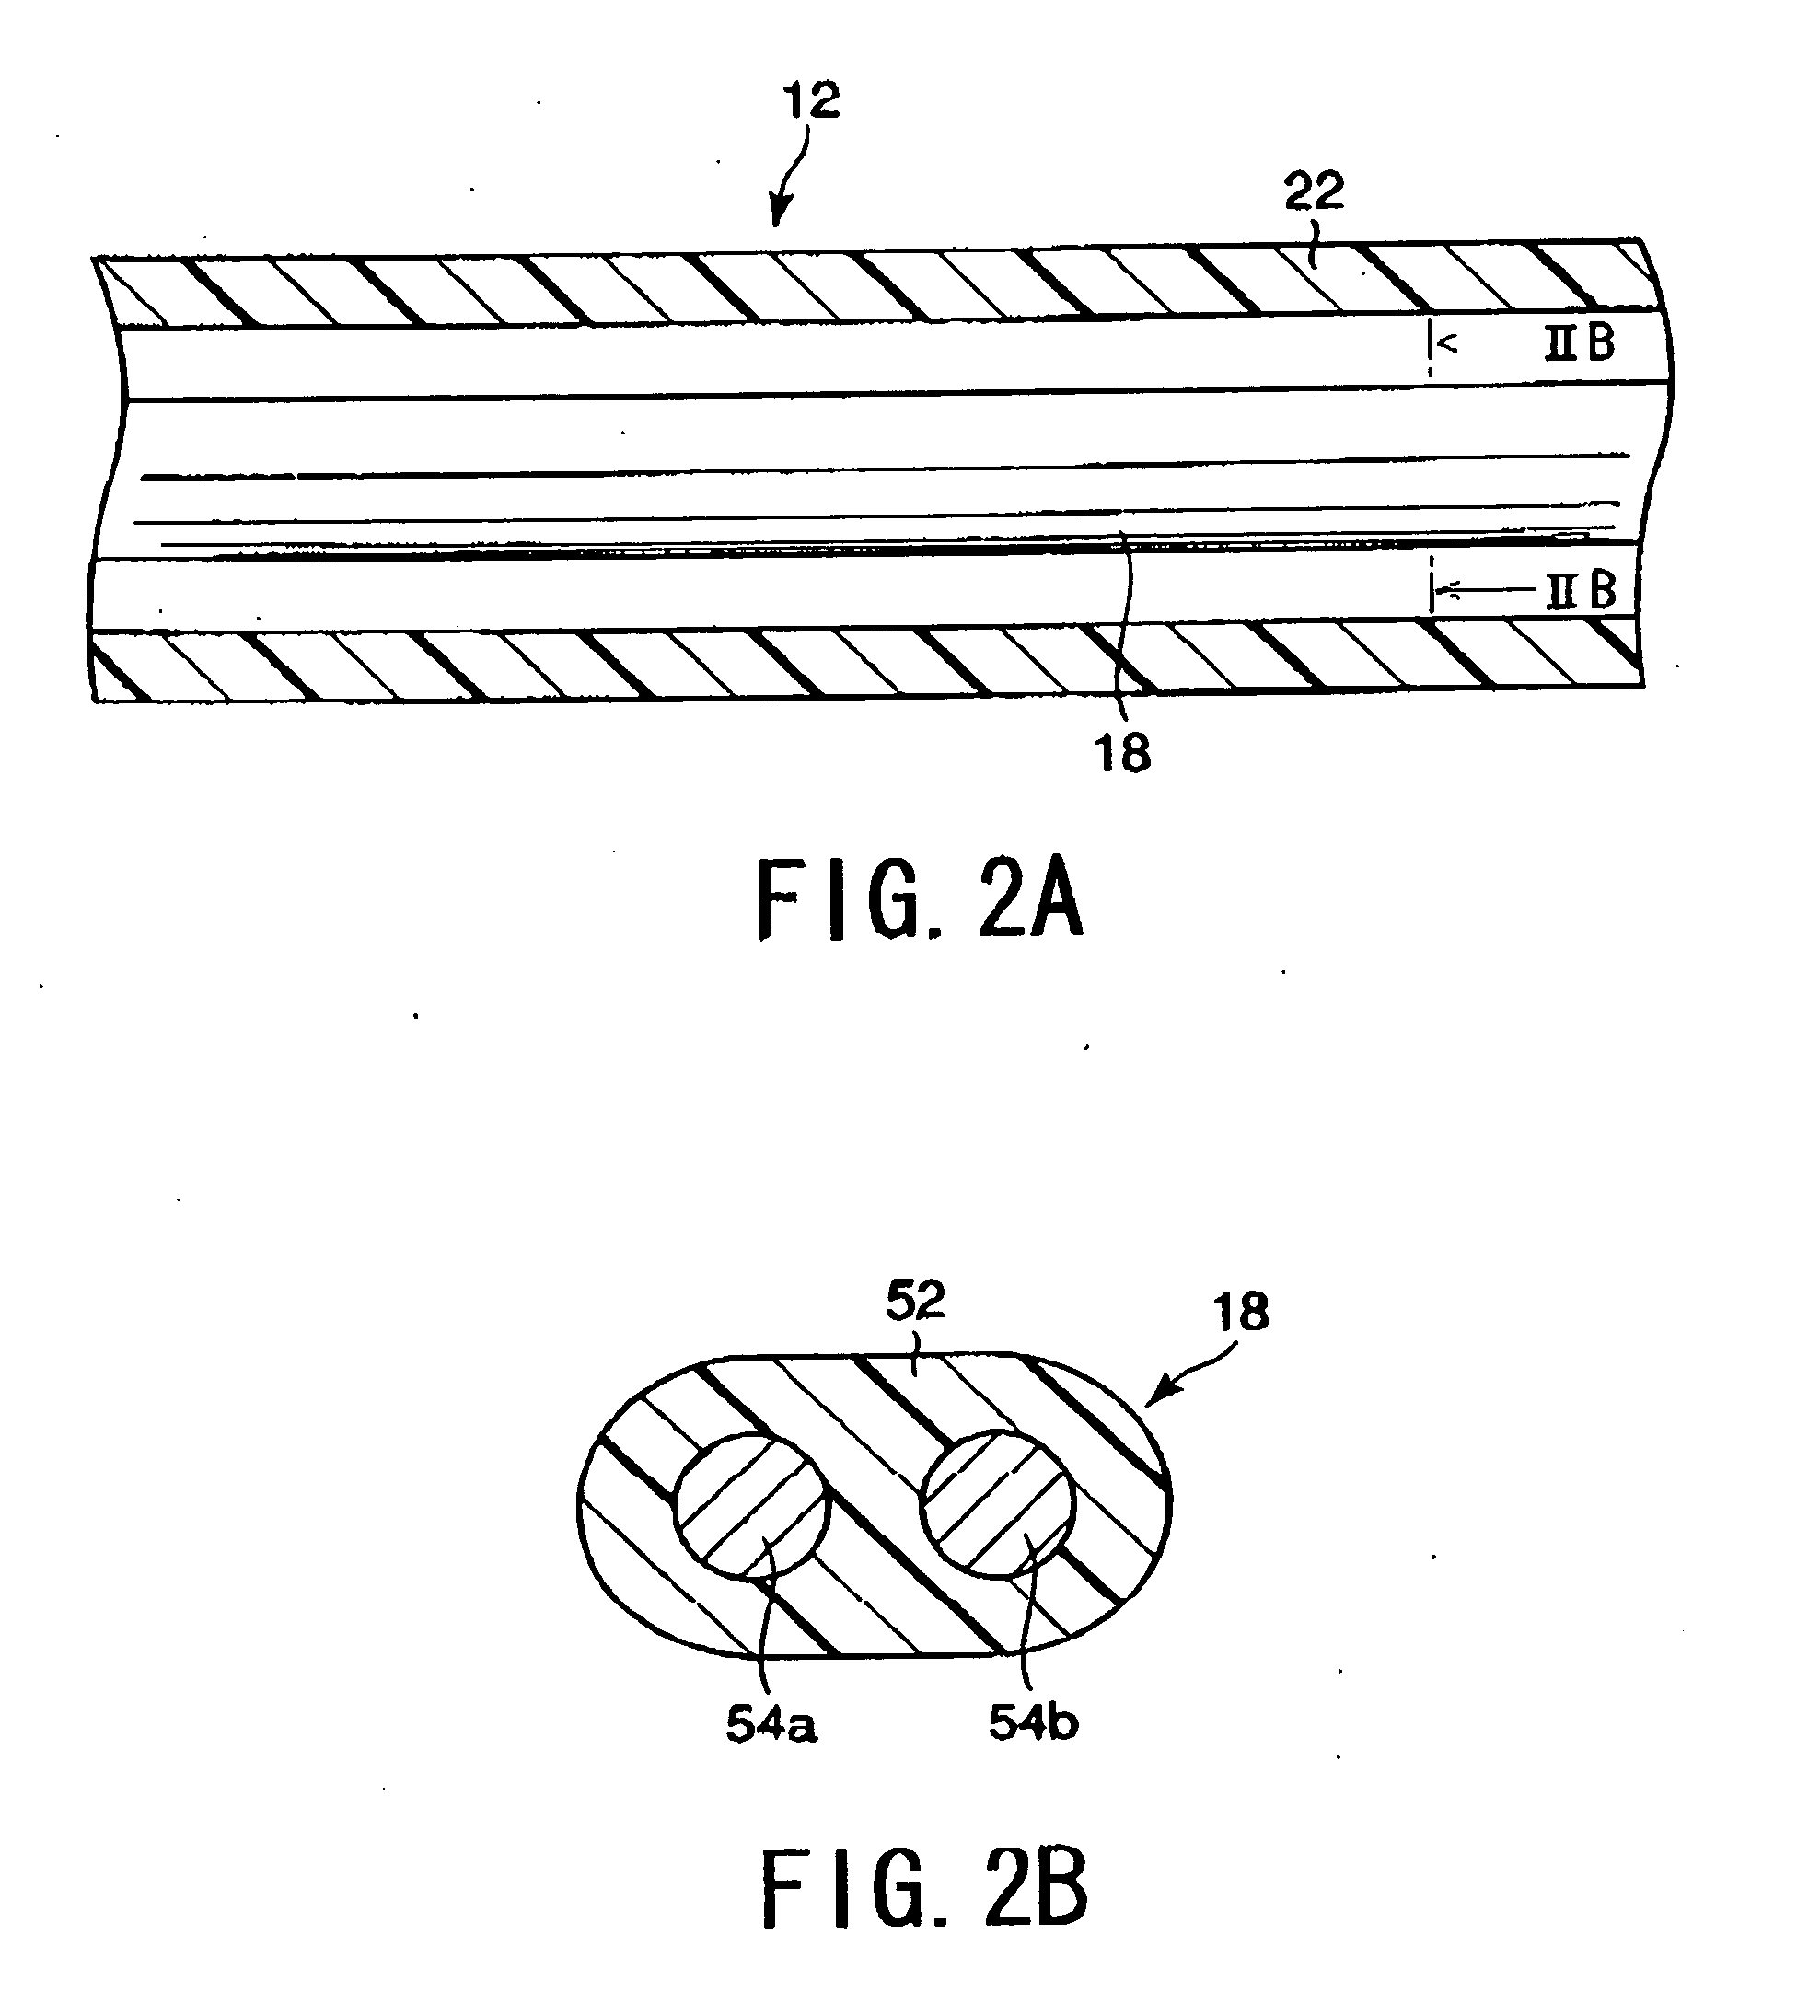 High frequency treatment device having a pair of jaws with electrodes